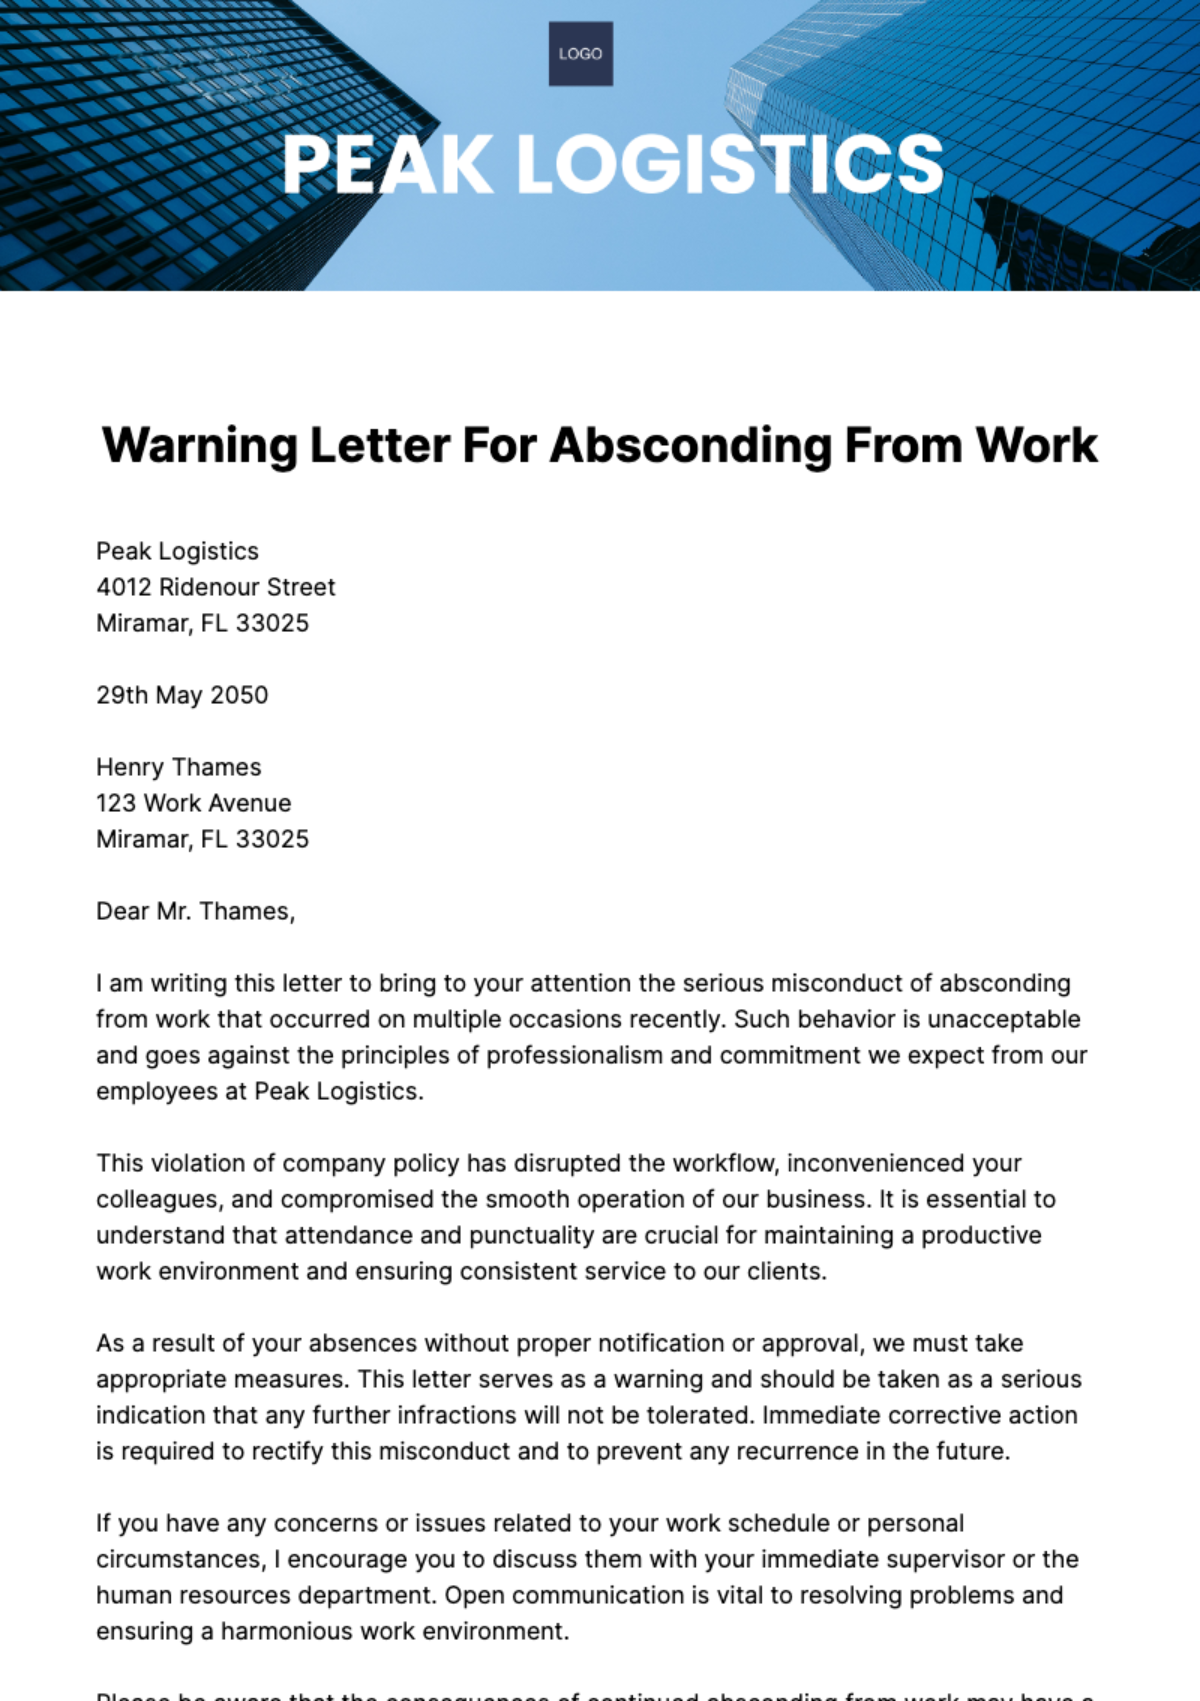 Warning Letter for Absconding from Work Template